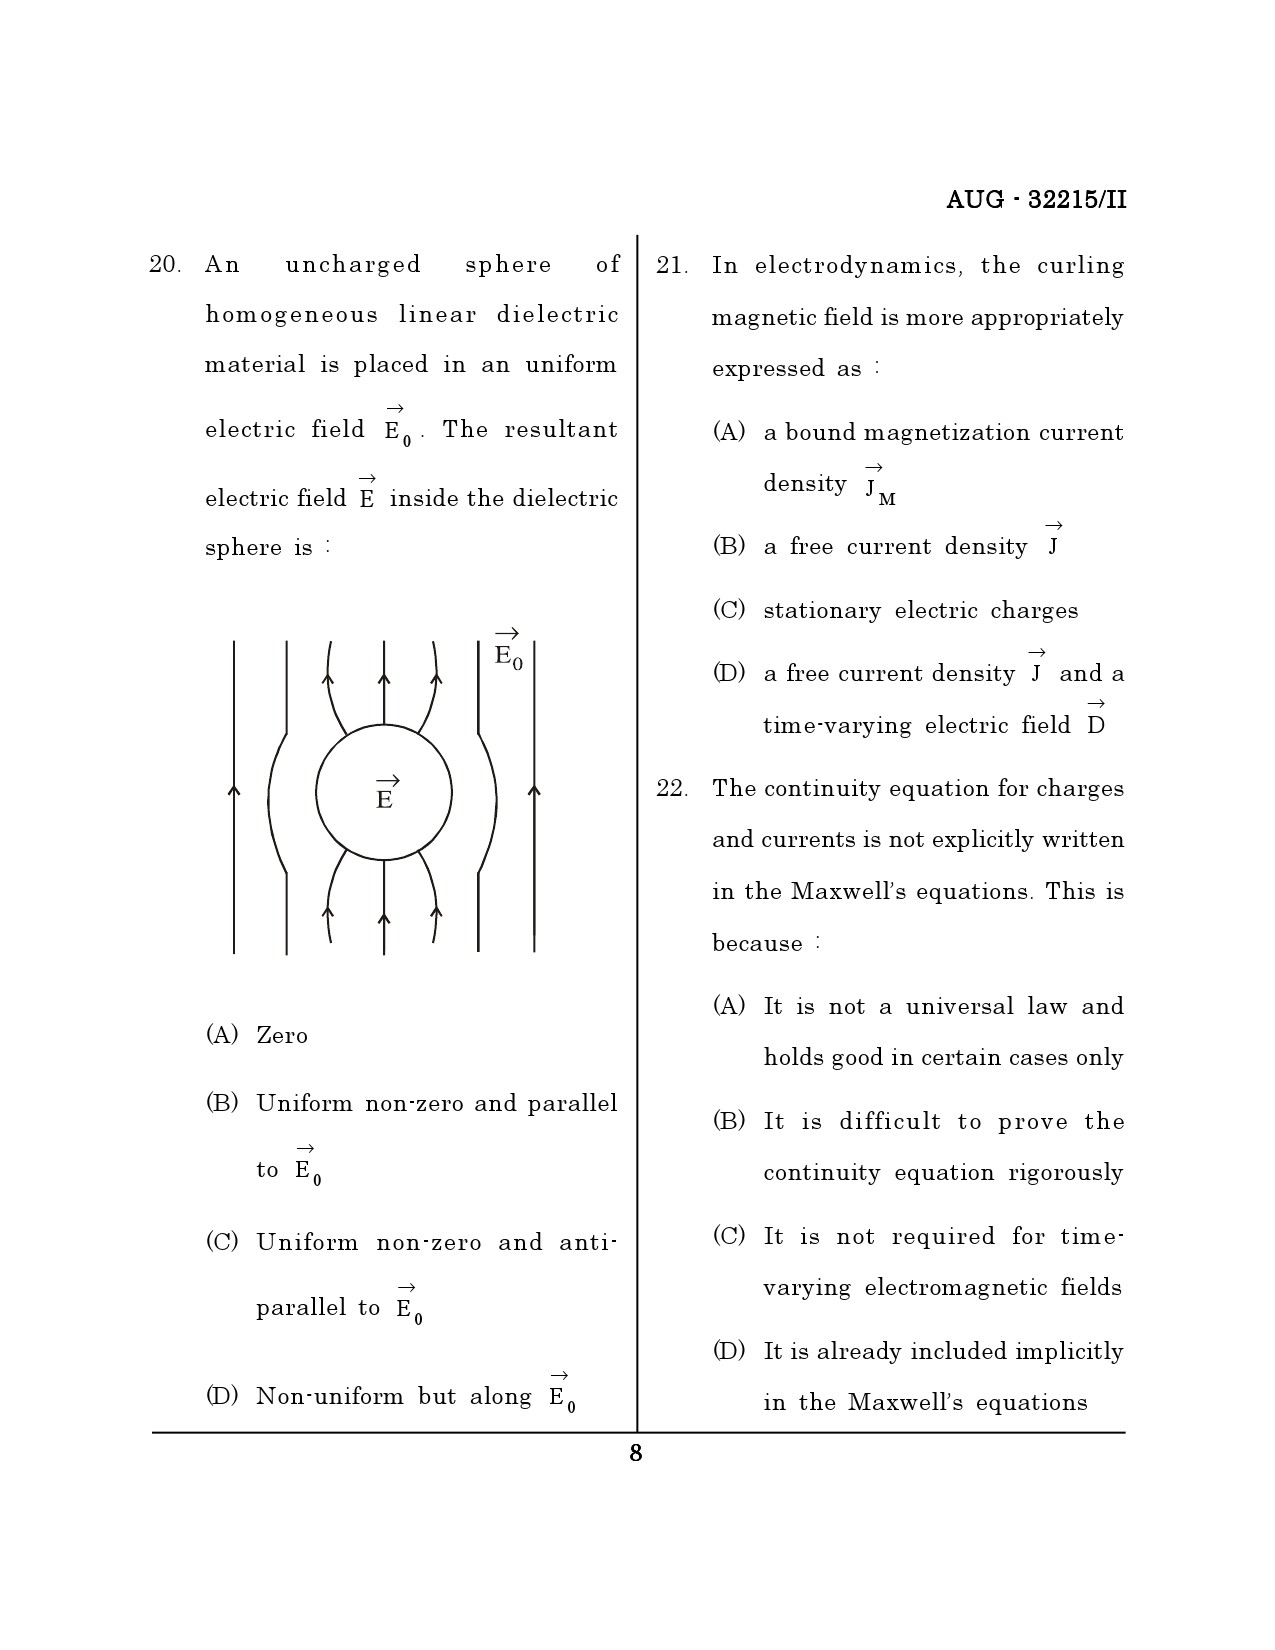 Maharashtra SET Physical Science Question Paper II August 2015 7